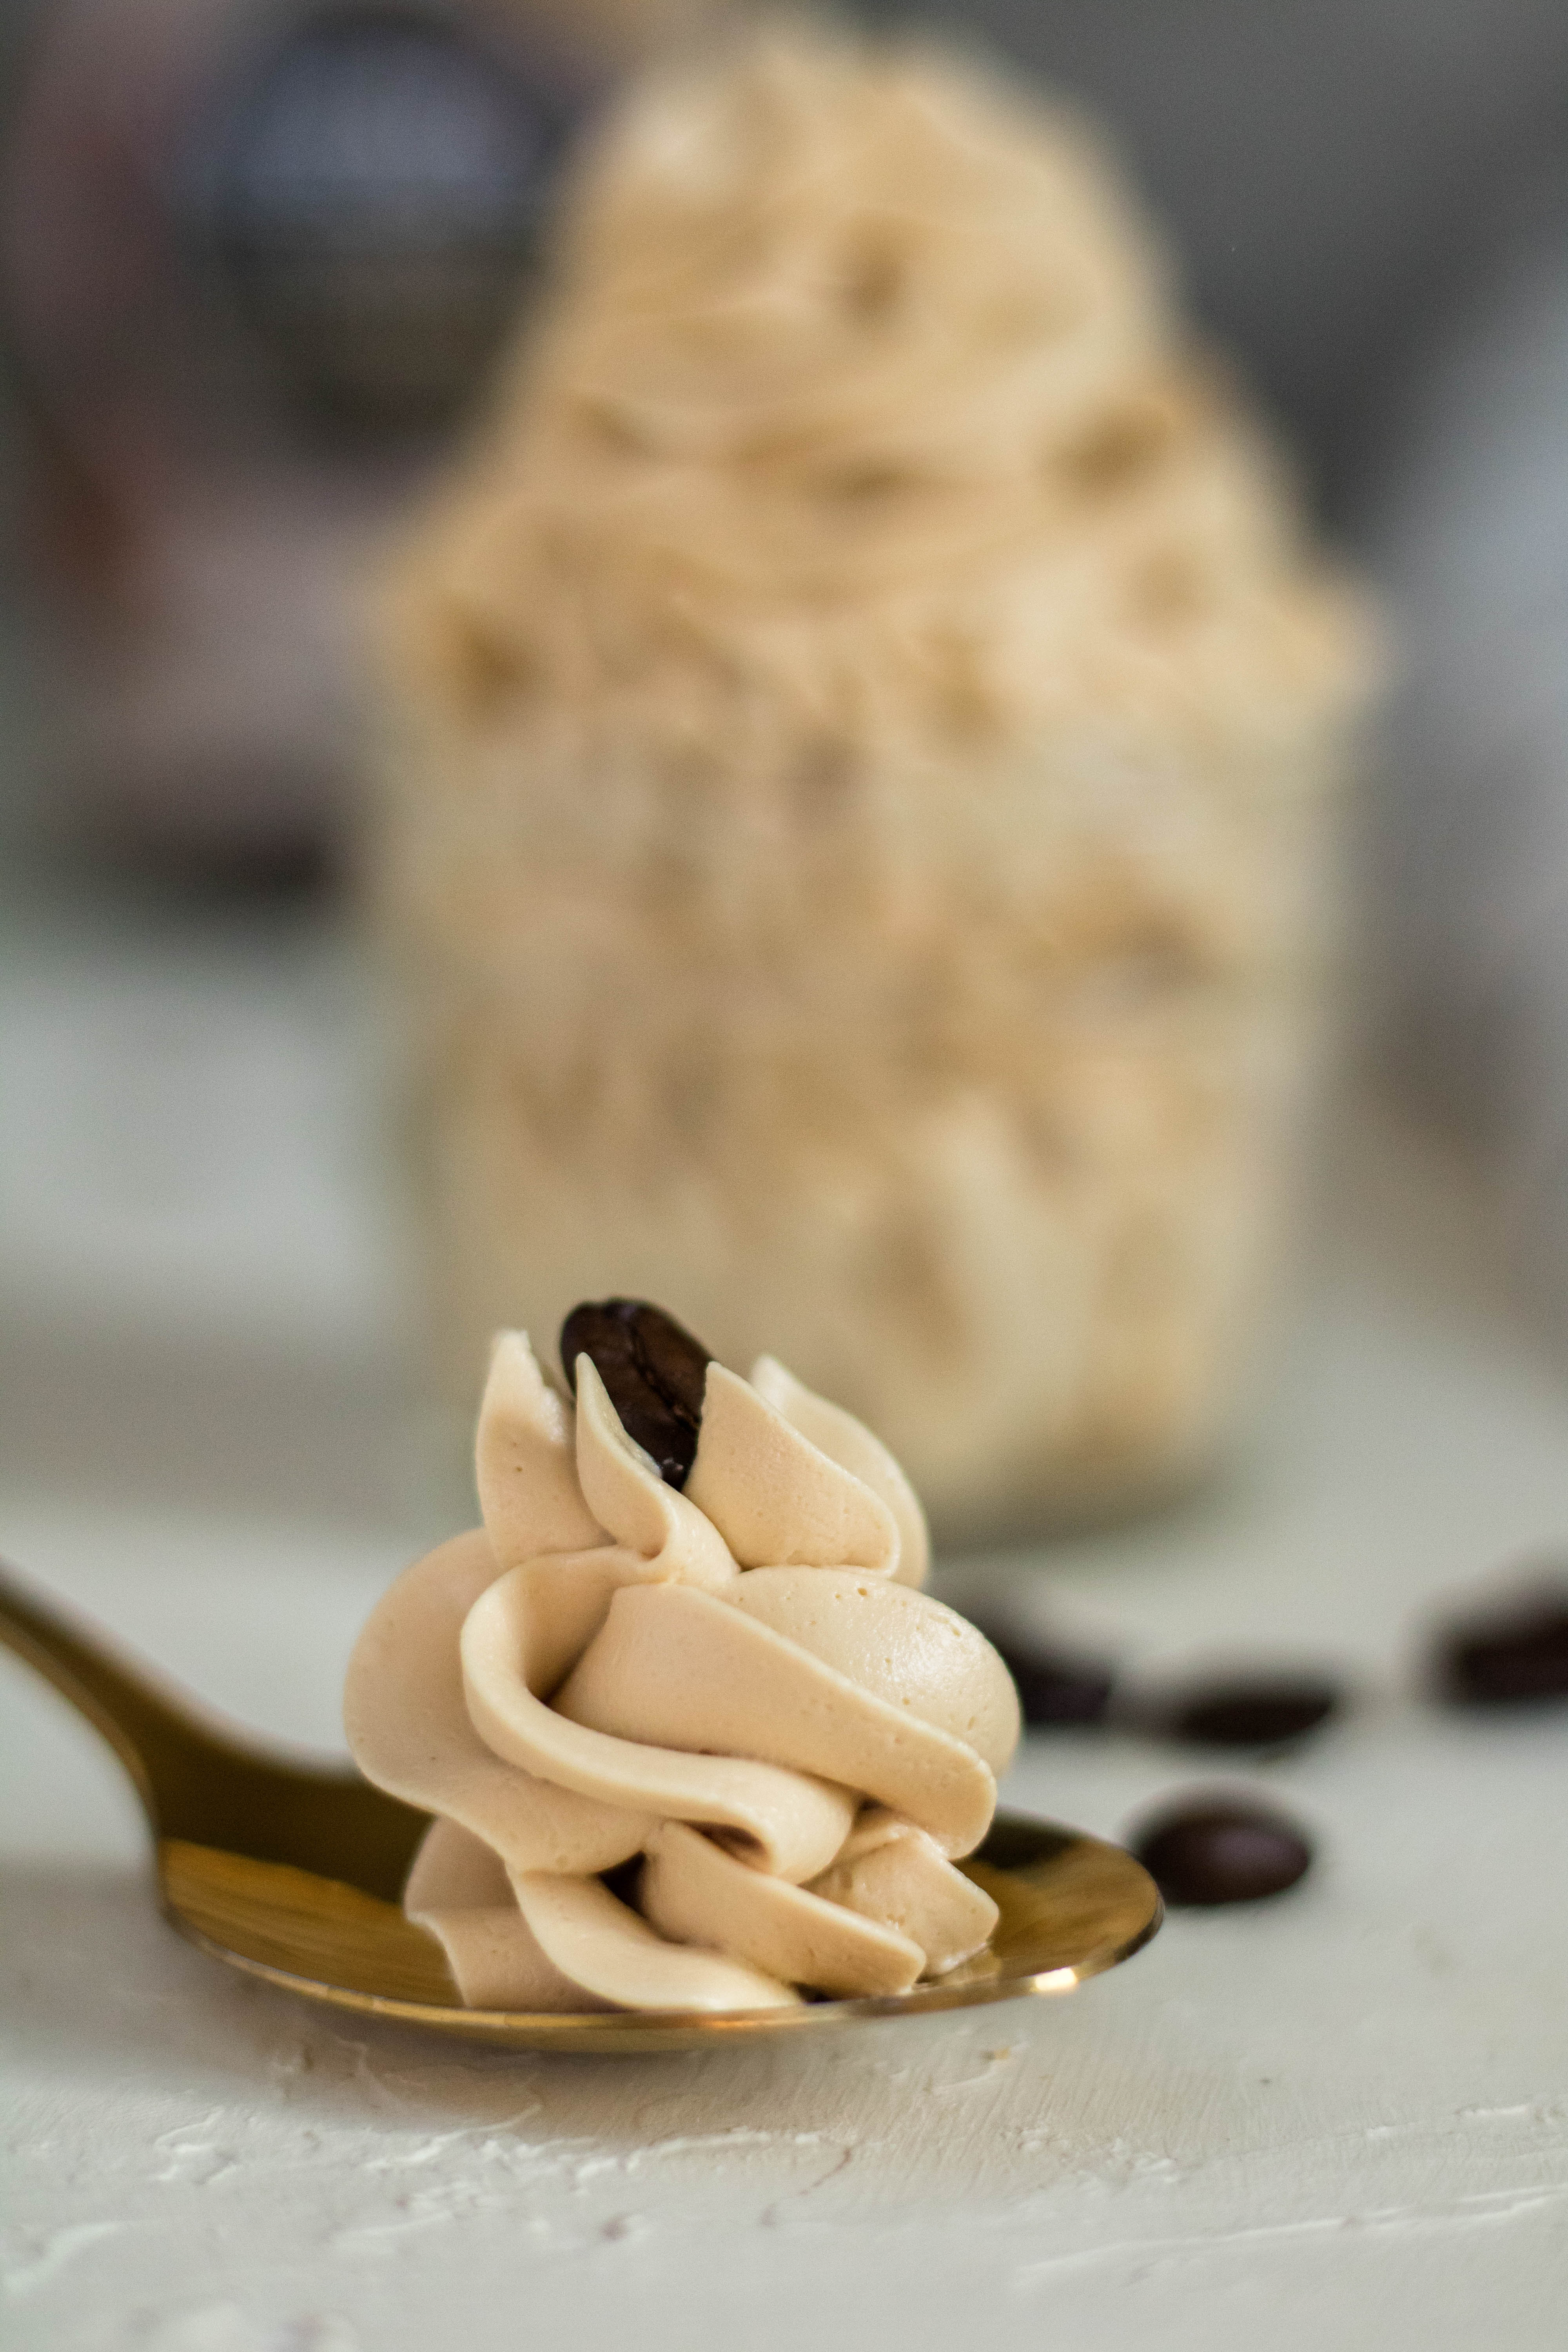 The best coffee frosting recipe ever